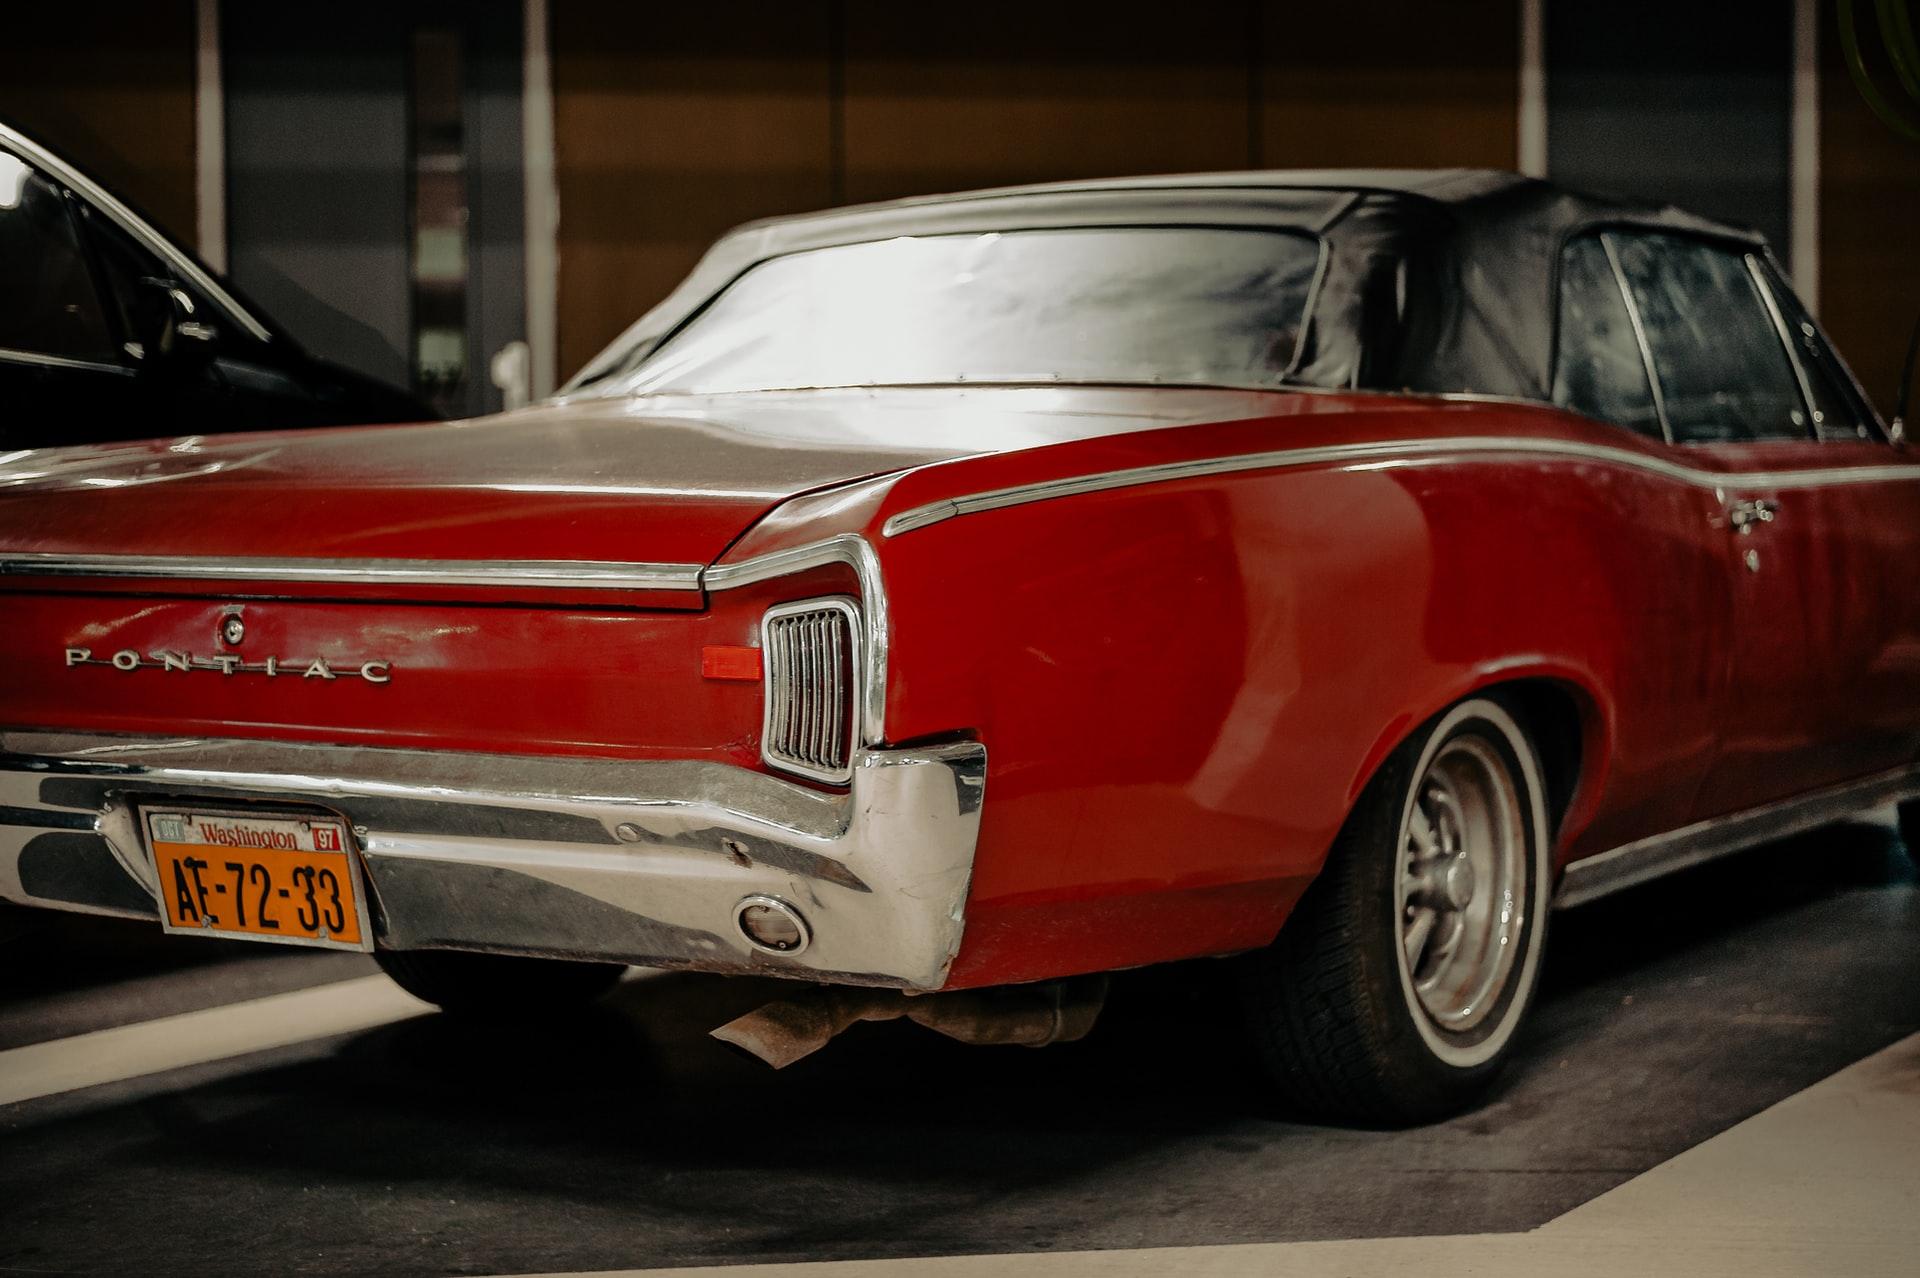 The Pontiac Tempest is a great model for a restoration project.